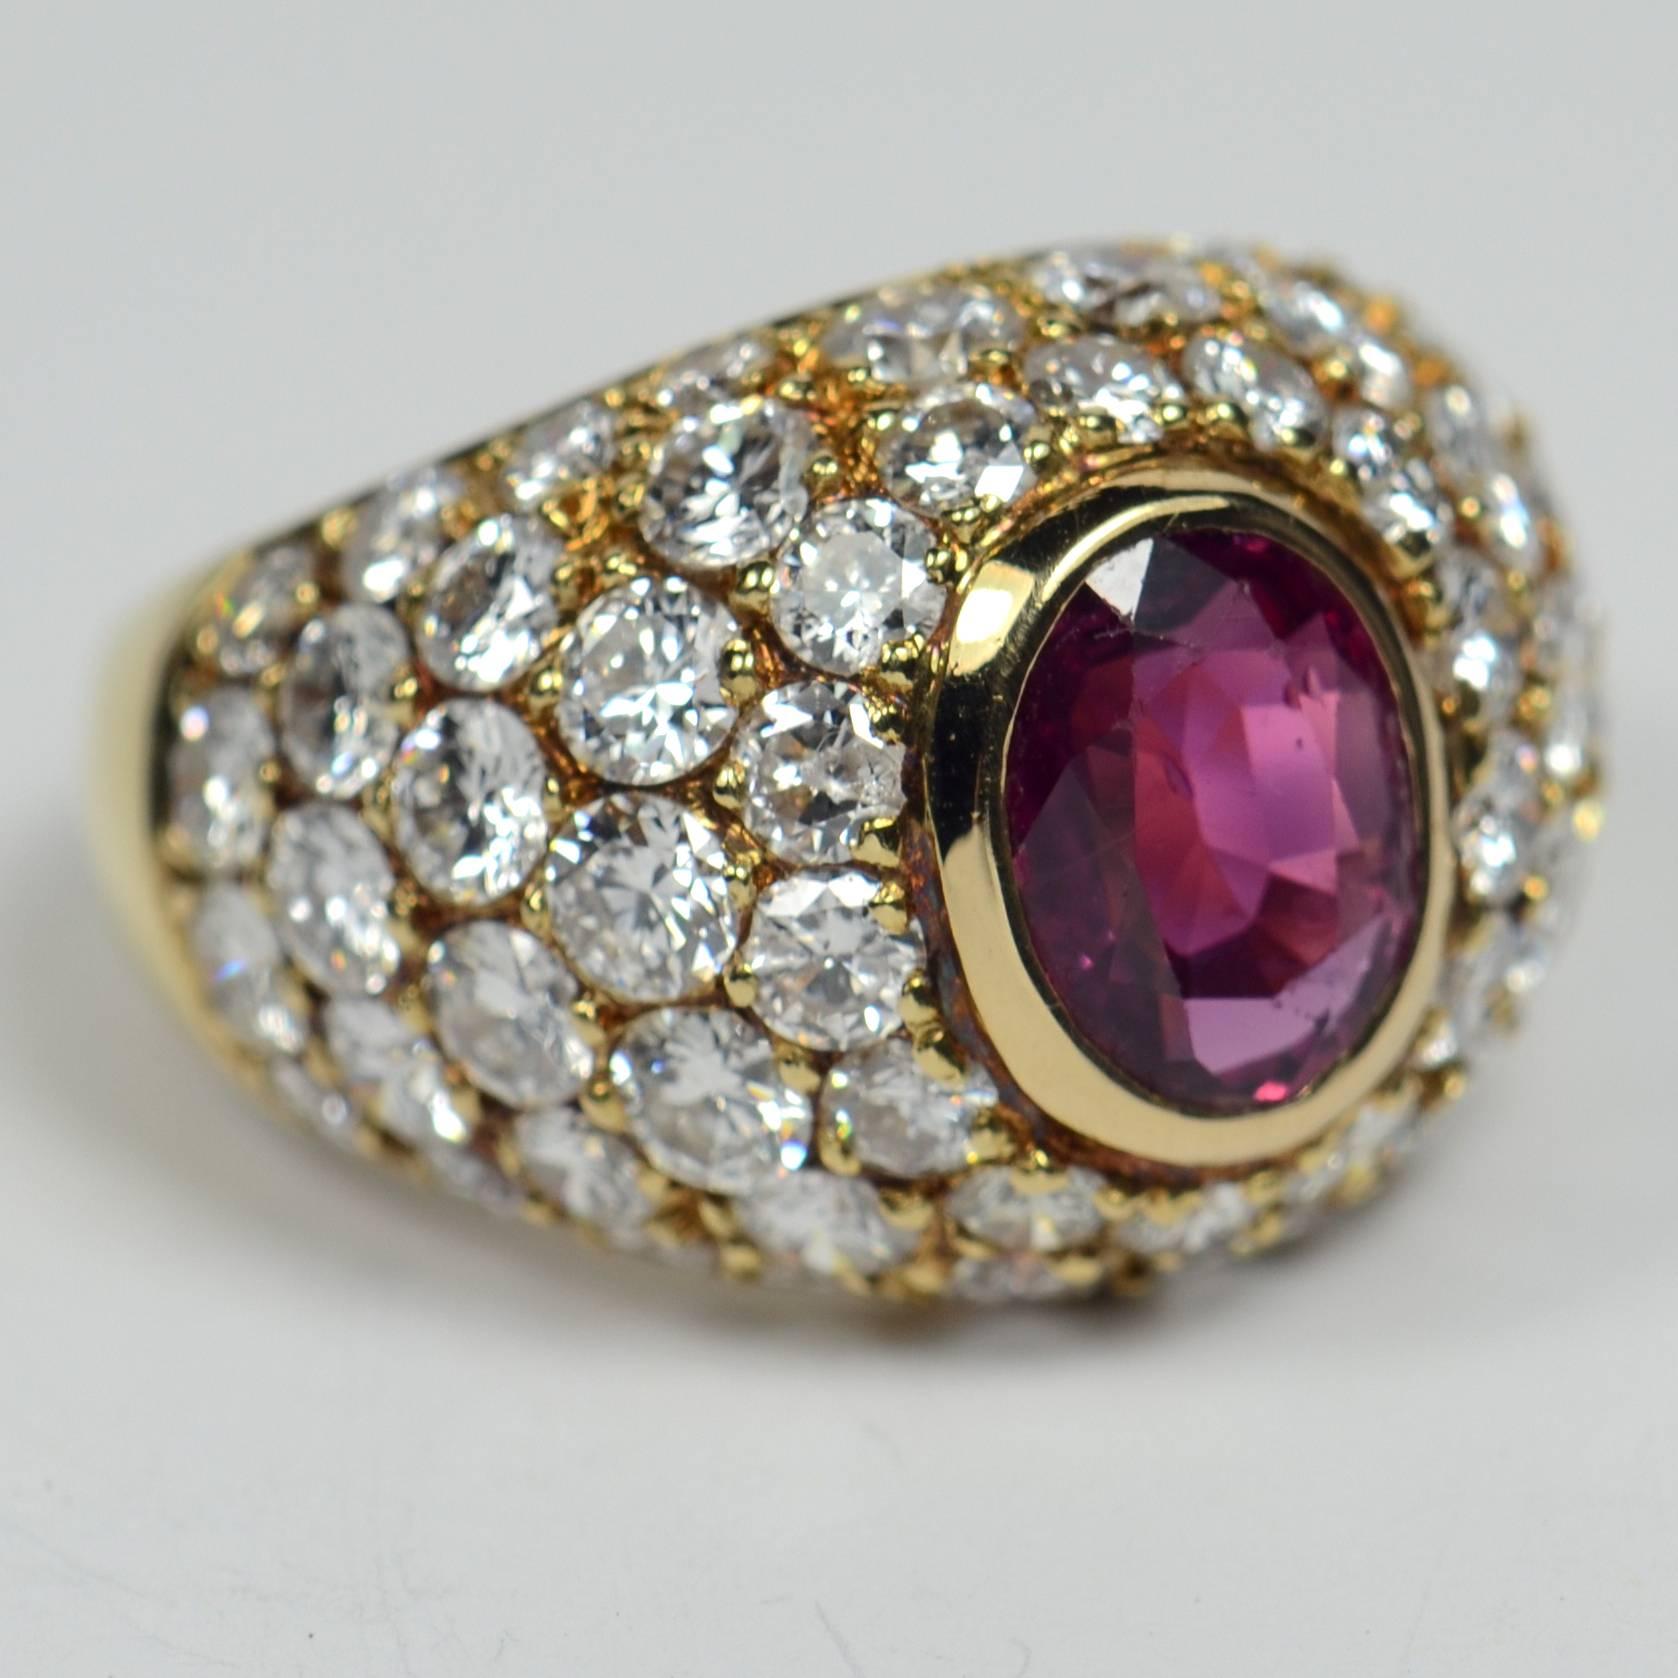 An 18 carat yellow gold French bombe ring centring an oval unheated ruby surrounded by pave-set round brilliant cut diamonds.

The natural, untreated ruby is estimated to weigh 1.60 carats, and we believe it to have come from Madagascar. The 58